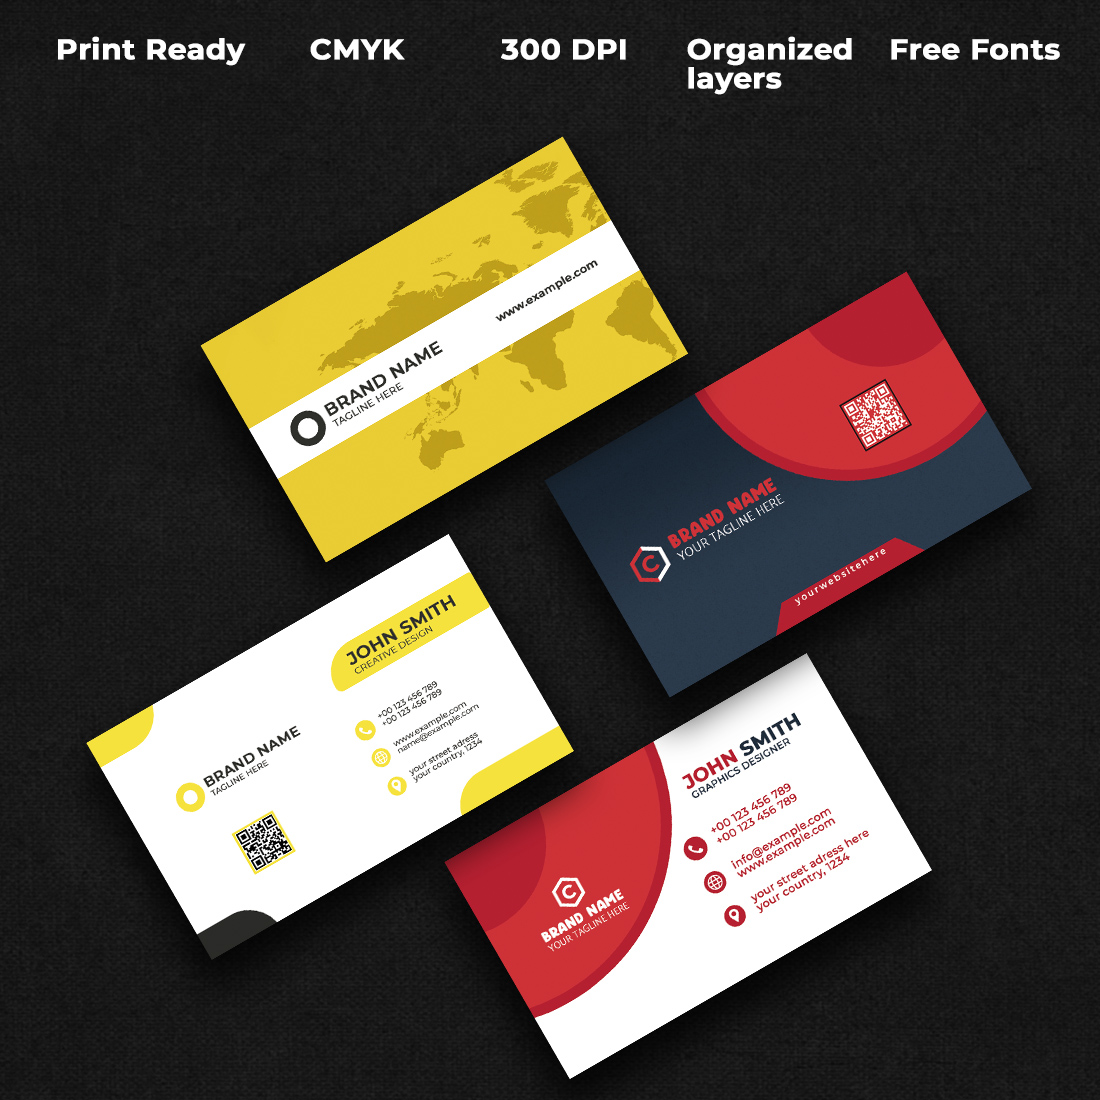 Creative Business Card Print Ready cover image.